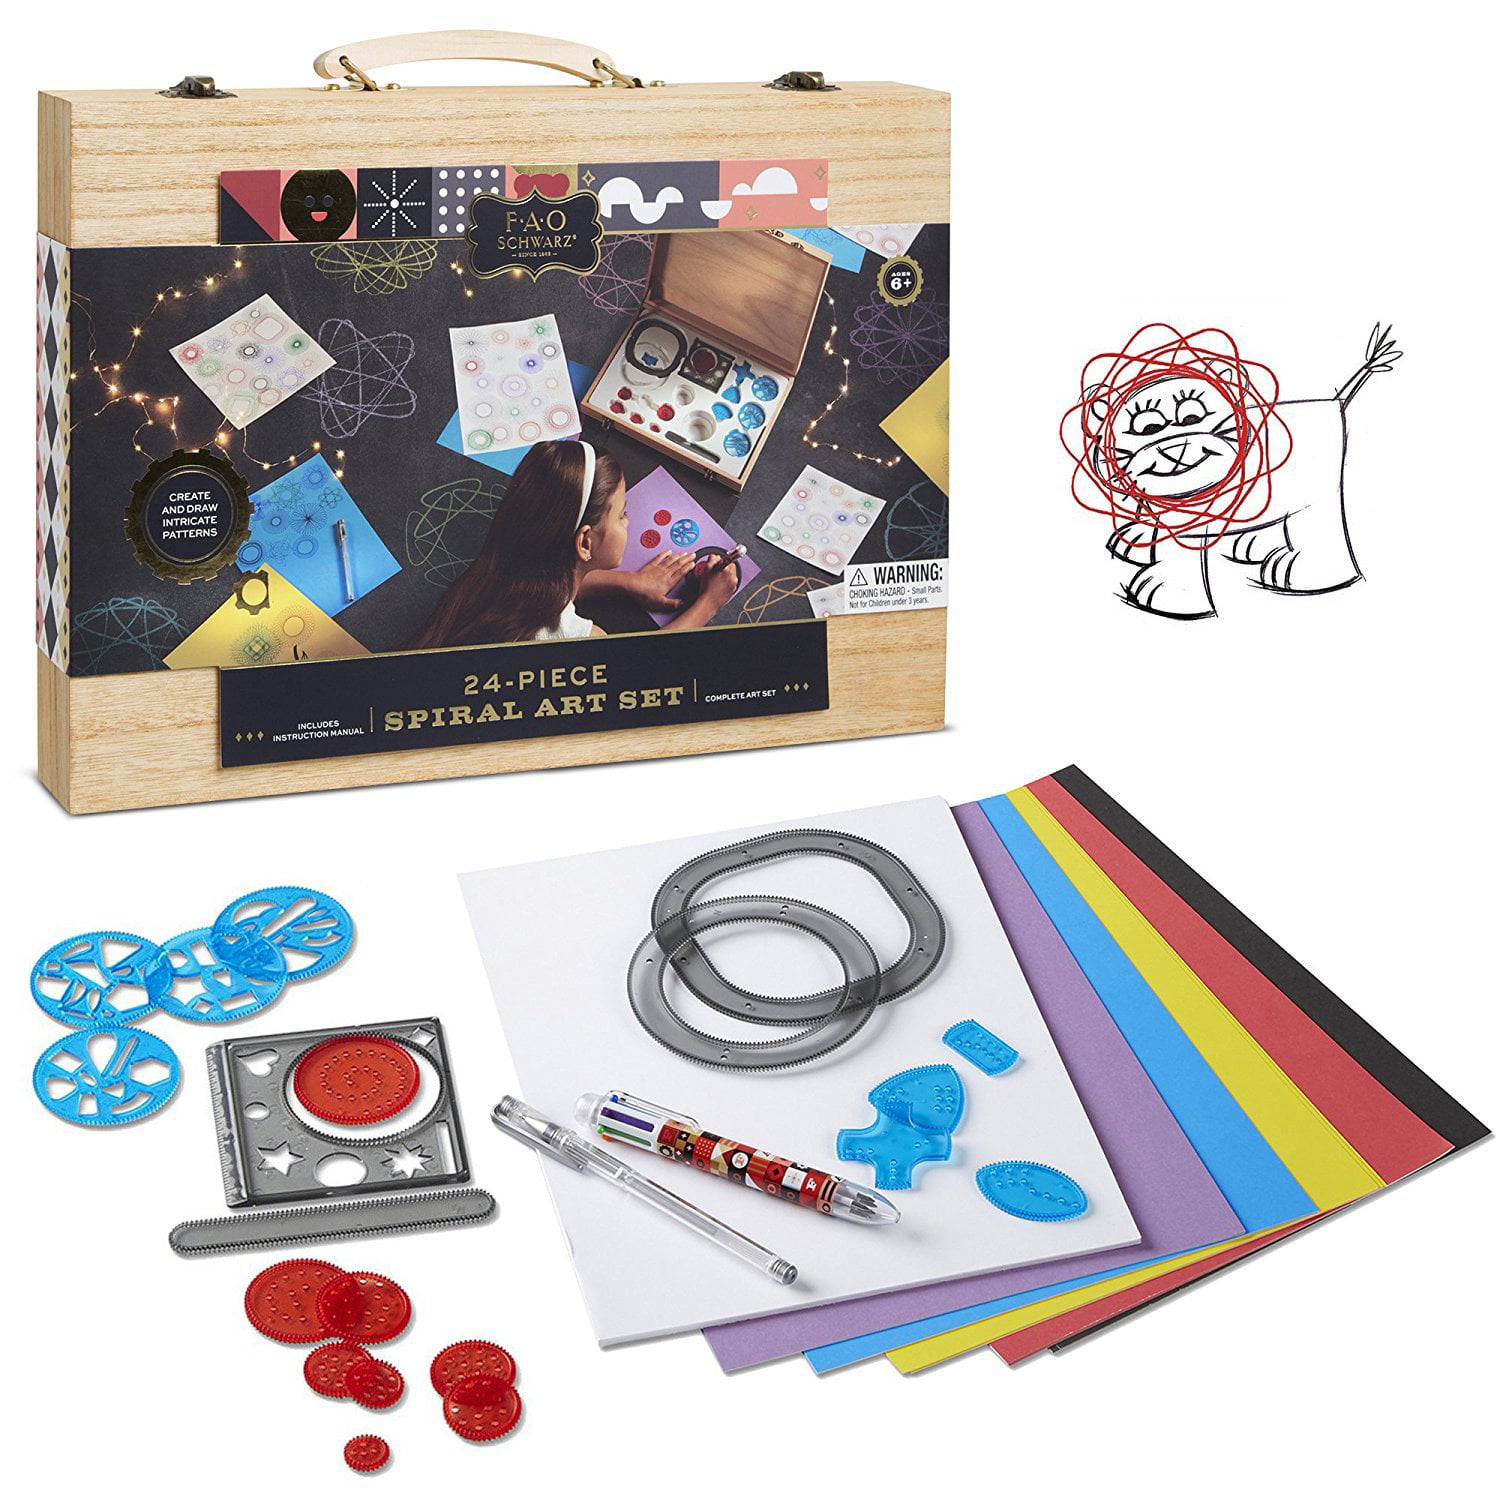 Color Zone Horizon Group Spiral Art Kit Ages 6+